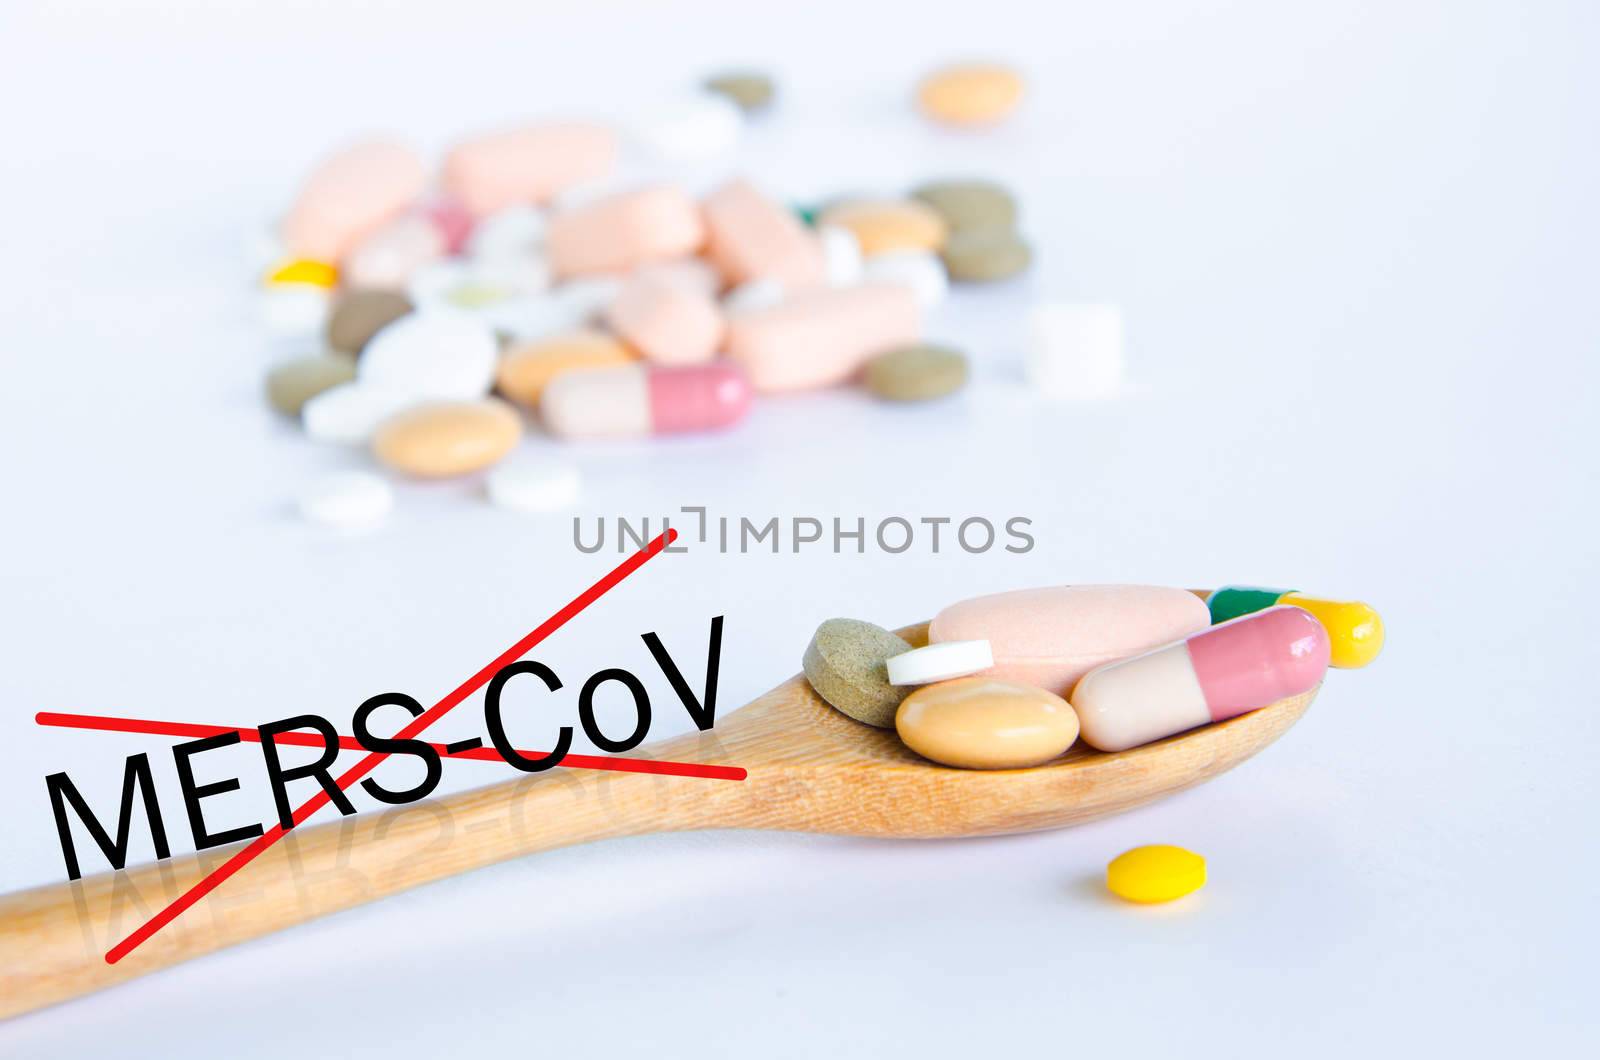 Mers-Cov ,Concept drugs for Stop MERS-CoV (Middle East Respiratory Syndrome Coronavirus) Tablets on wooden spoon